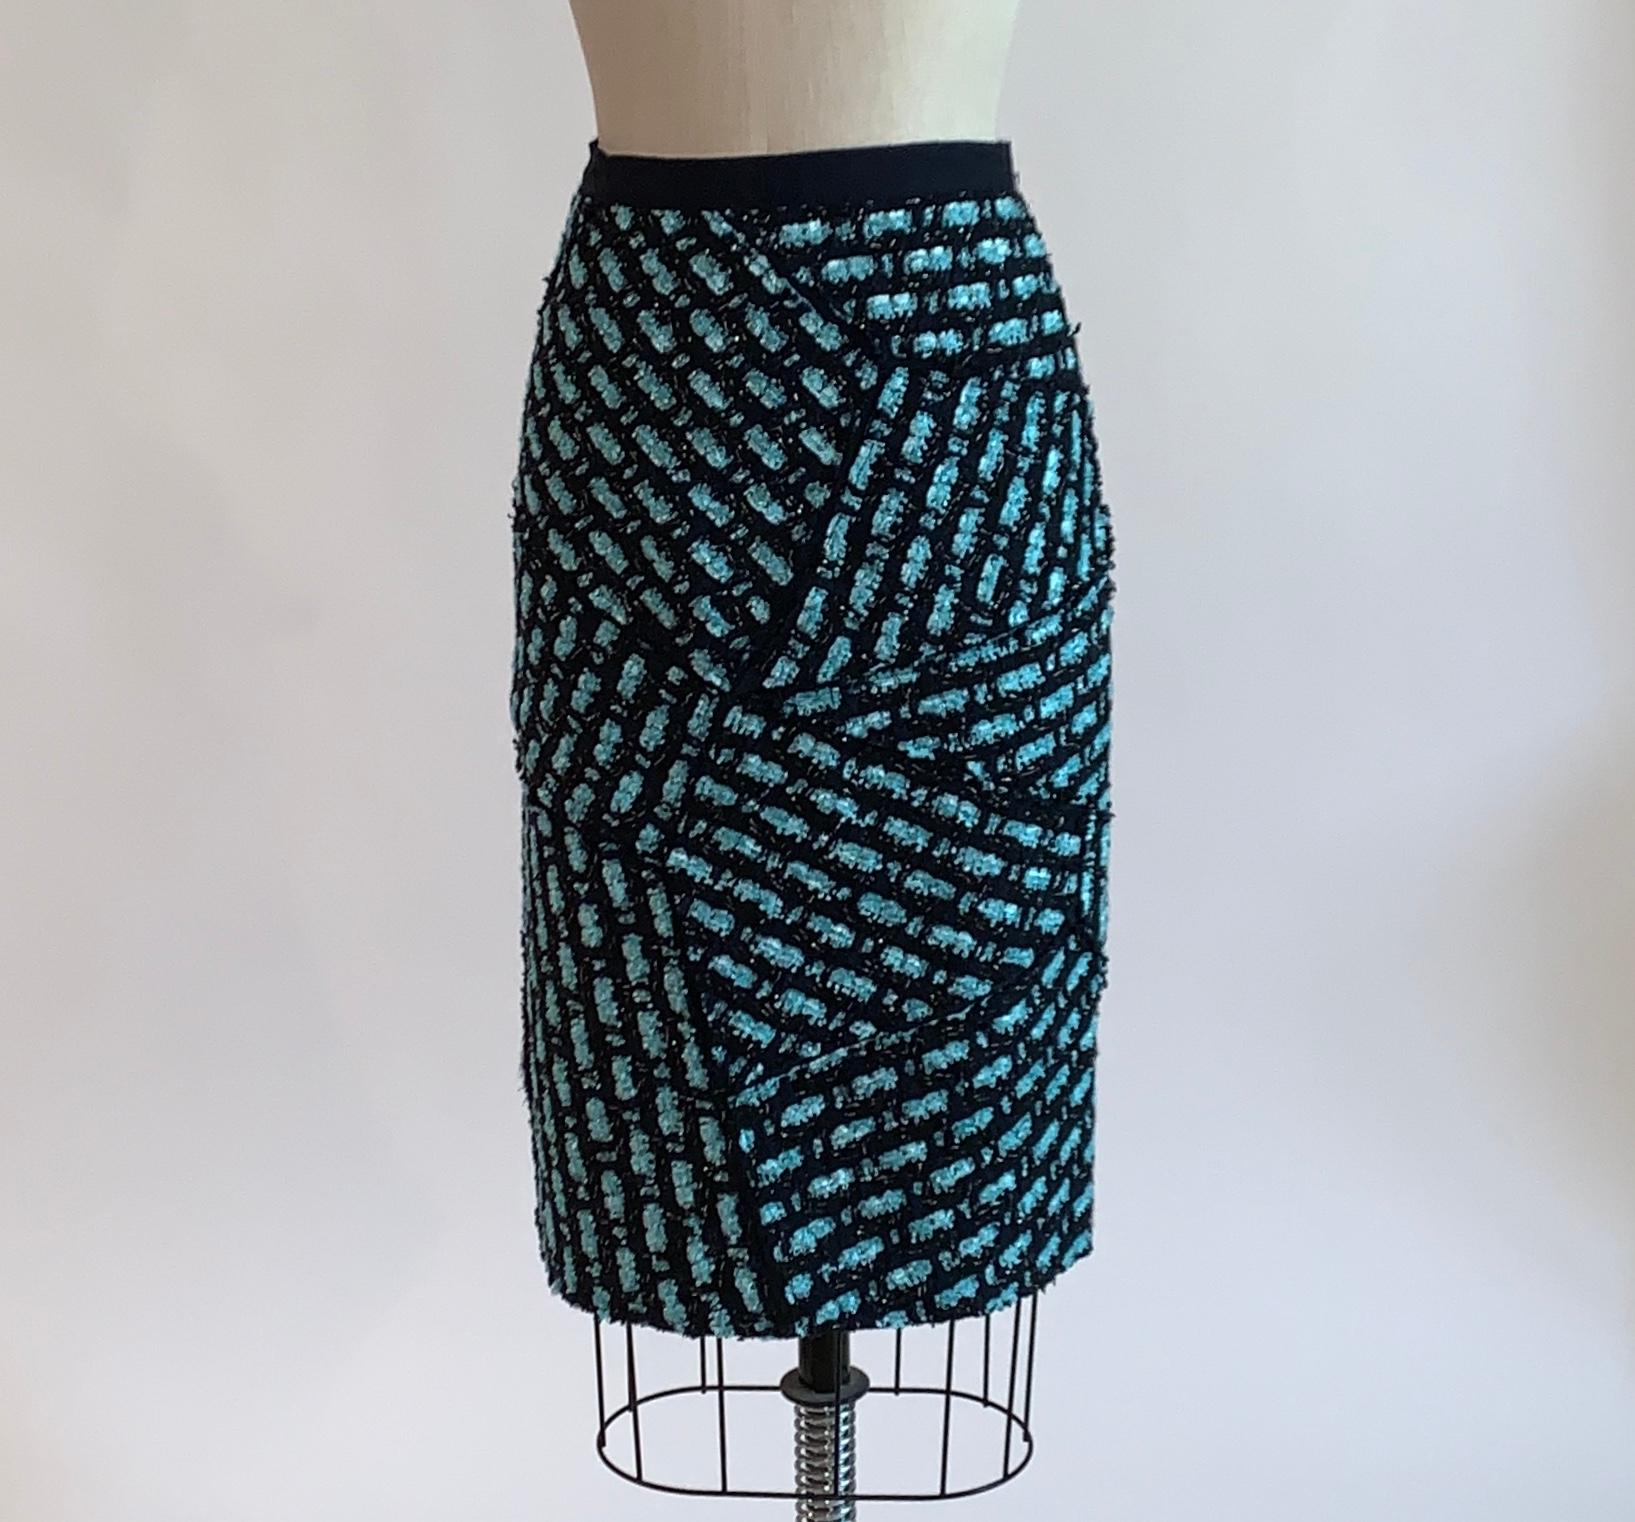 Oscar de la Renta deep navy (almost black) and sky blue pencil skirt with tweed patchwork appliqué with sky blue and silver accents. Very slight asymmetric back hem due to the patchwork style. Grosgrain band at waist, back zip and hook and eye